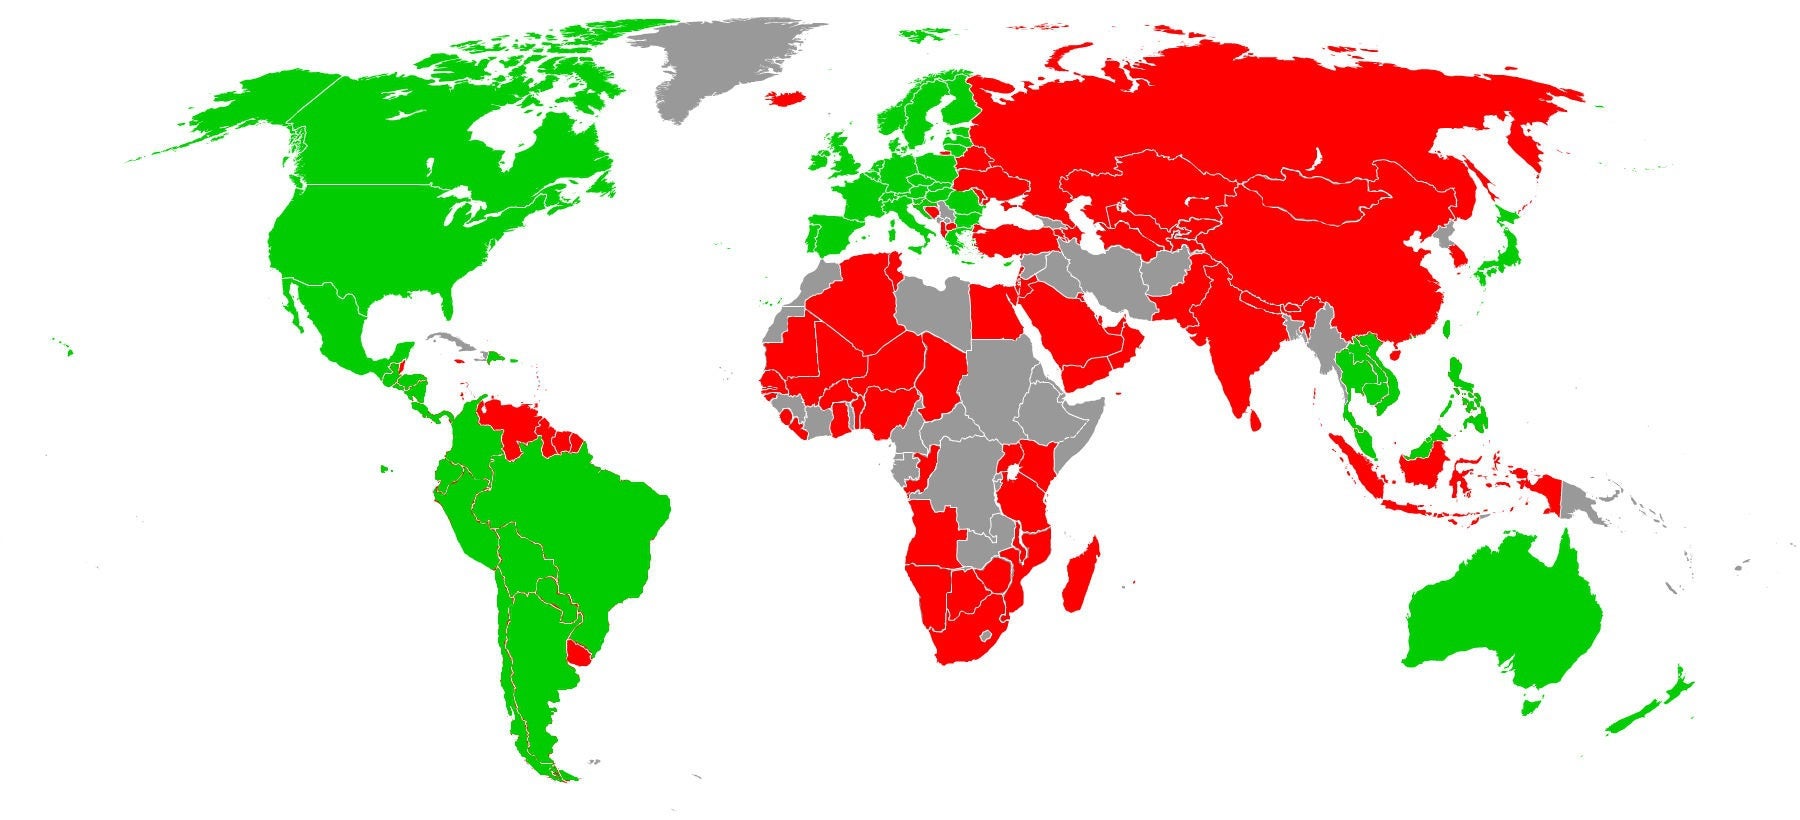 In green, countries where everything is available, in red - only limited parts of iTunes. - Apple's mini tablet could be a haven for international media consumption